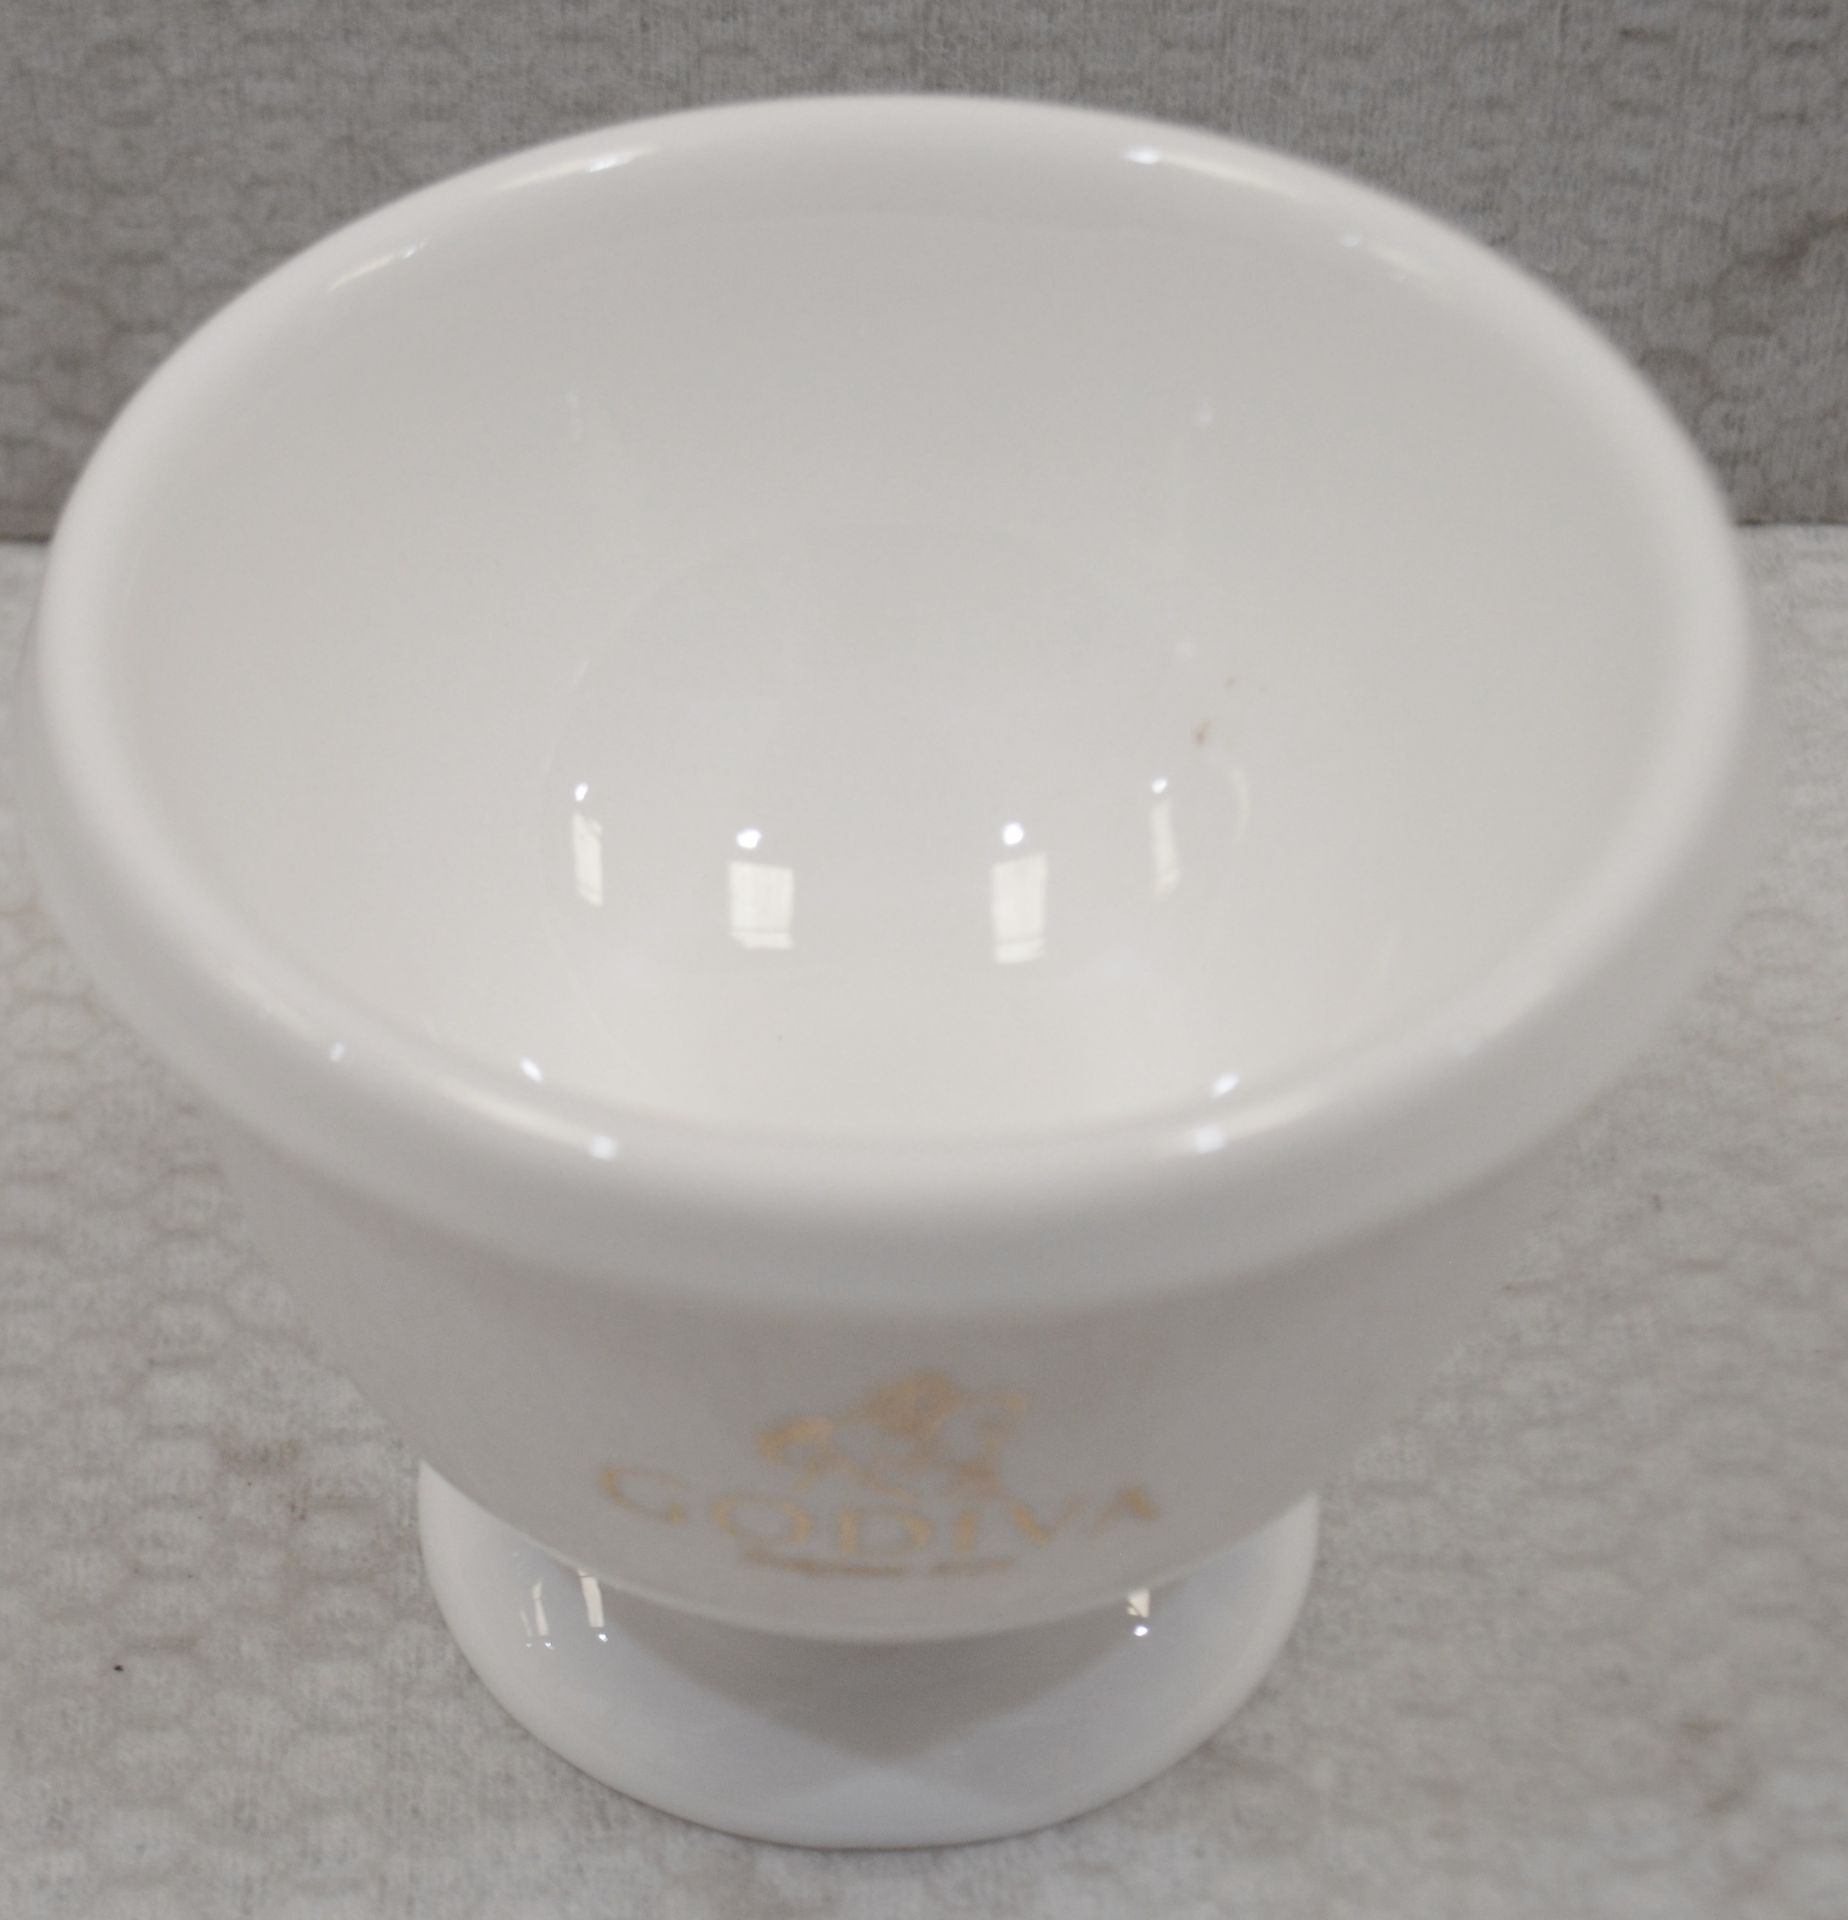 14 x Godiva White and Gold Bowls Suitable For Deserts, Soups or Starters - Recently Removed From A - Image 2 of 2